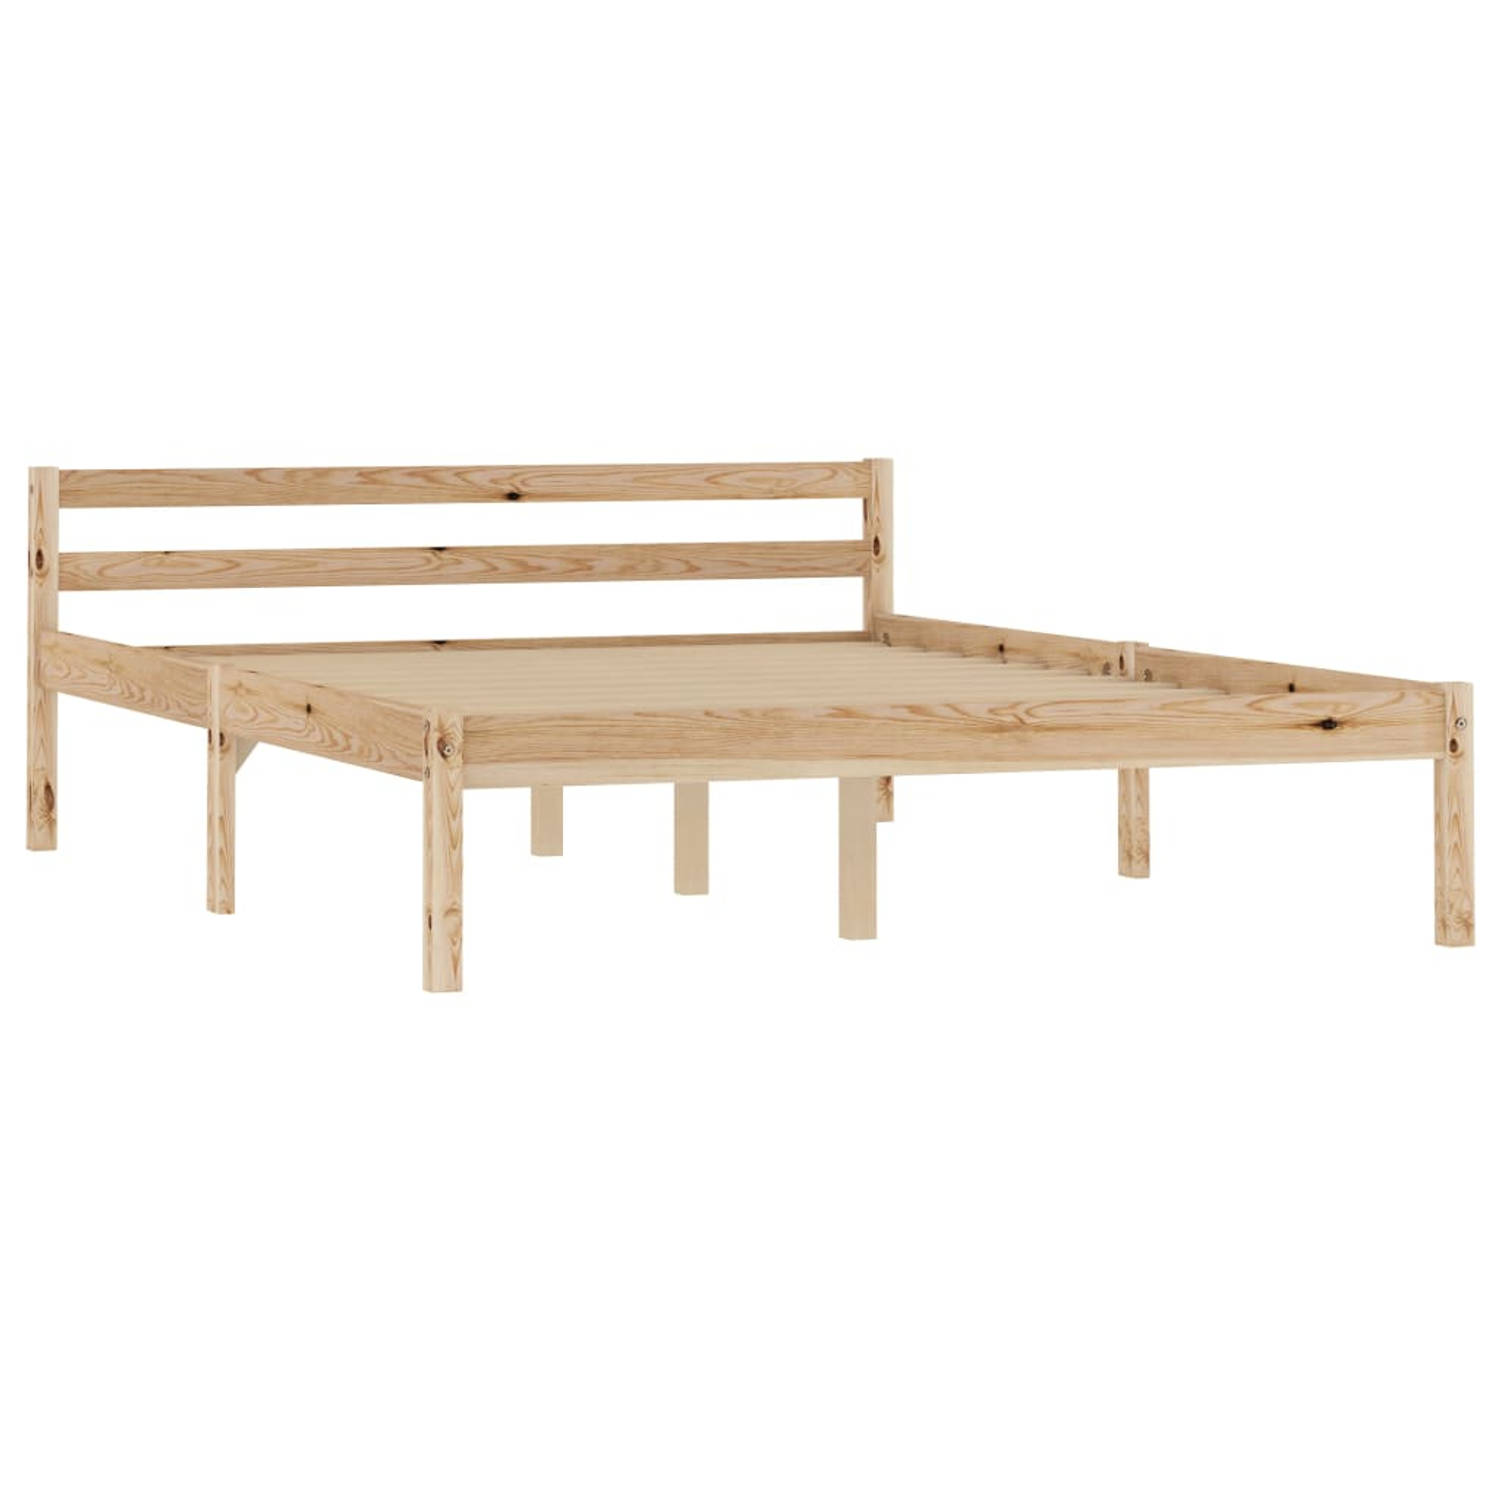 The Living Store Bedframe massief grenenhout 120x200 cm - Bed